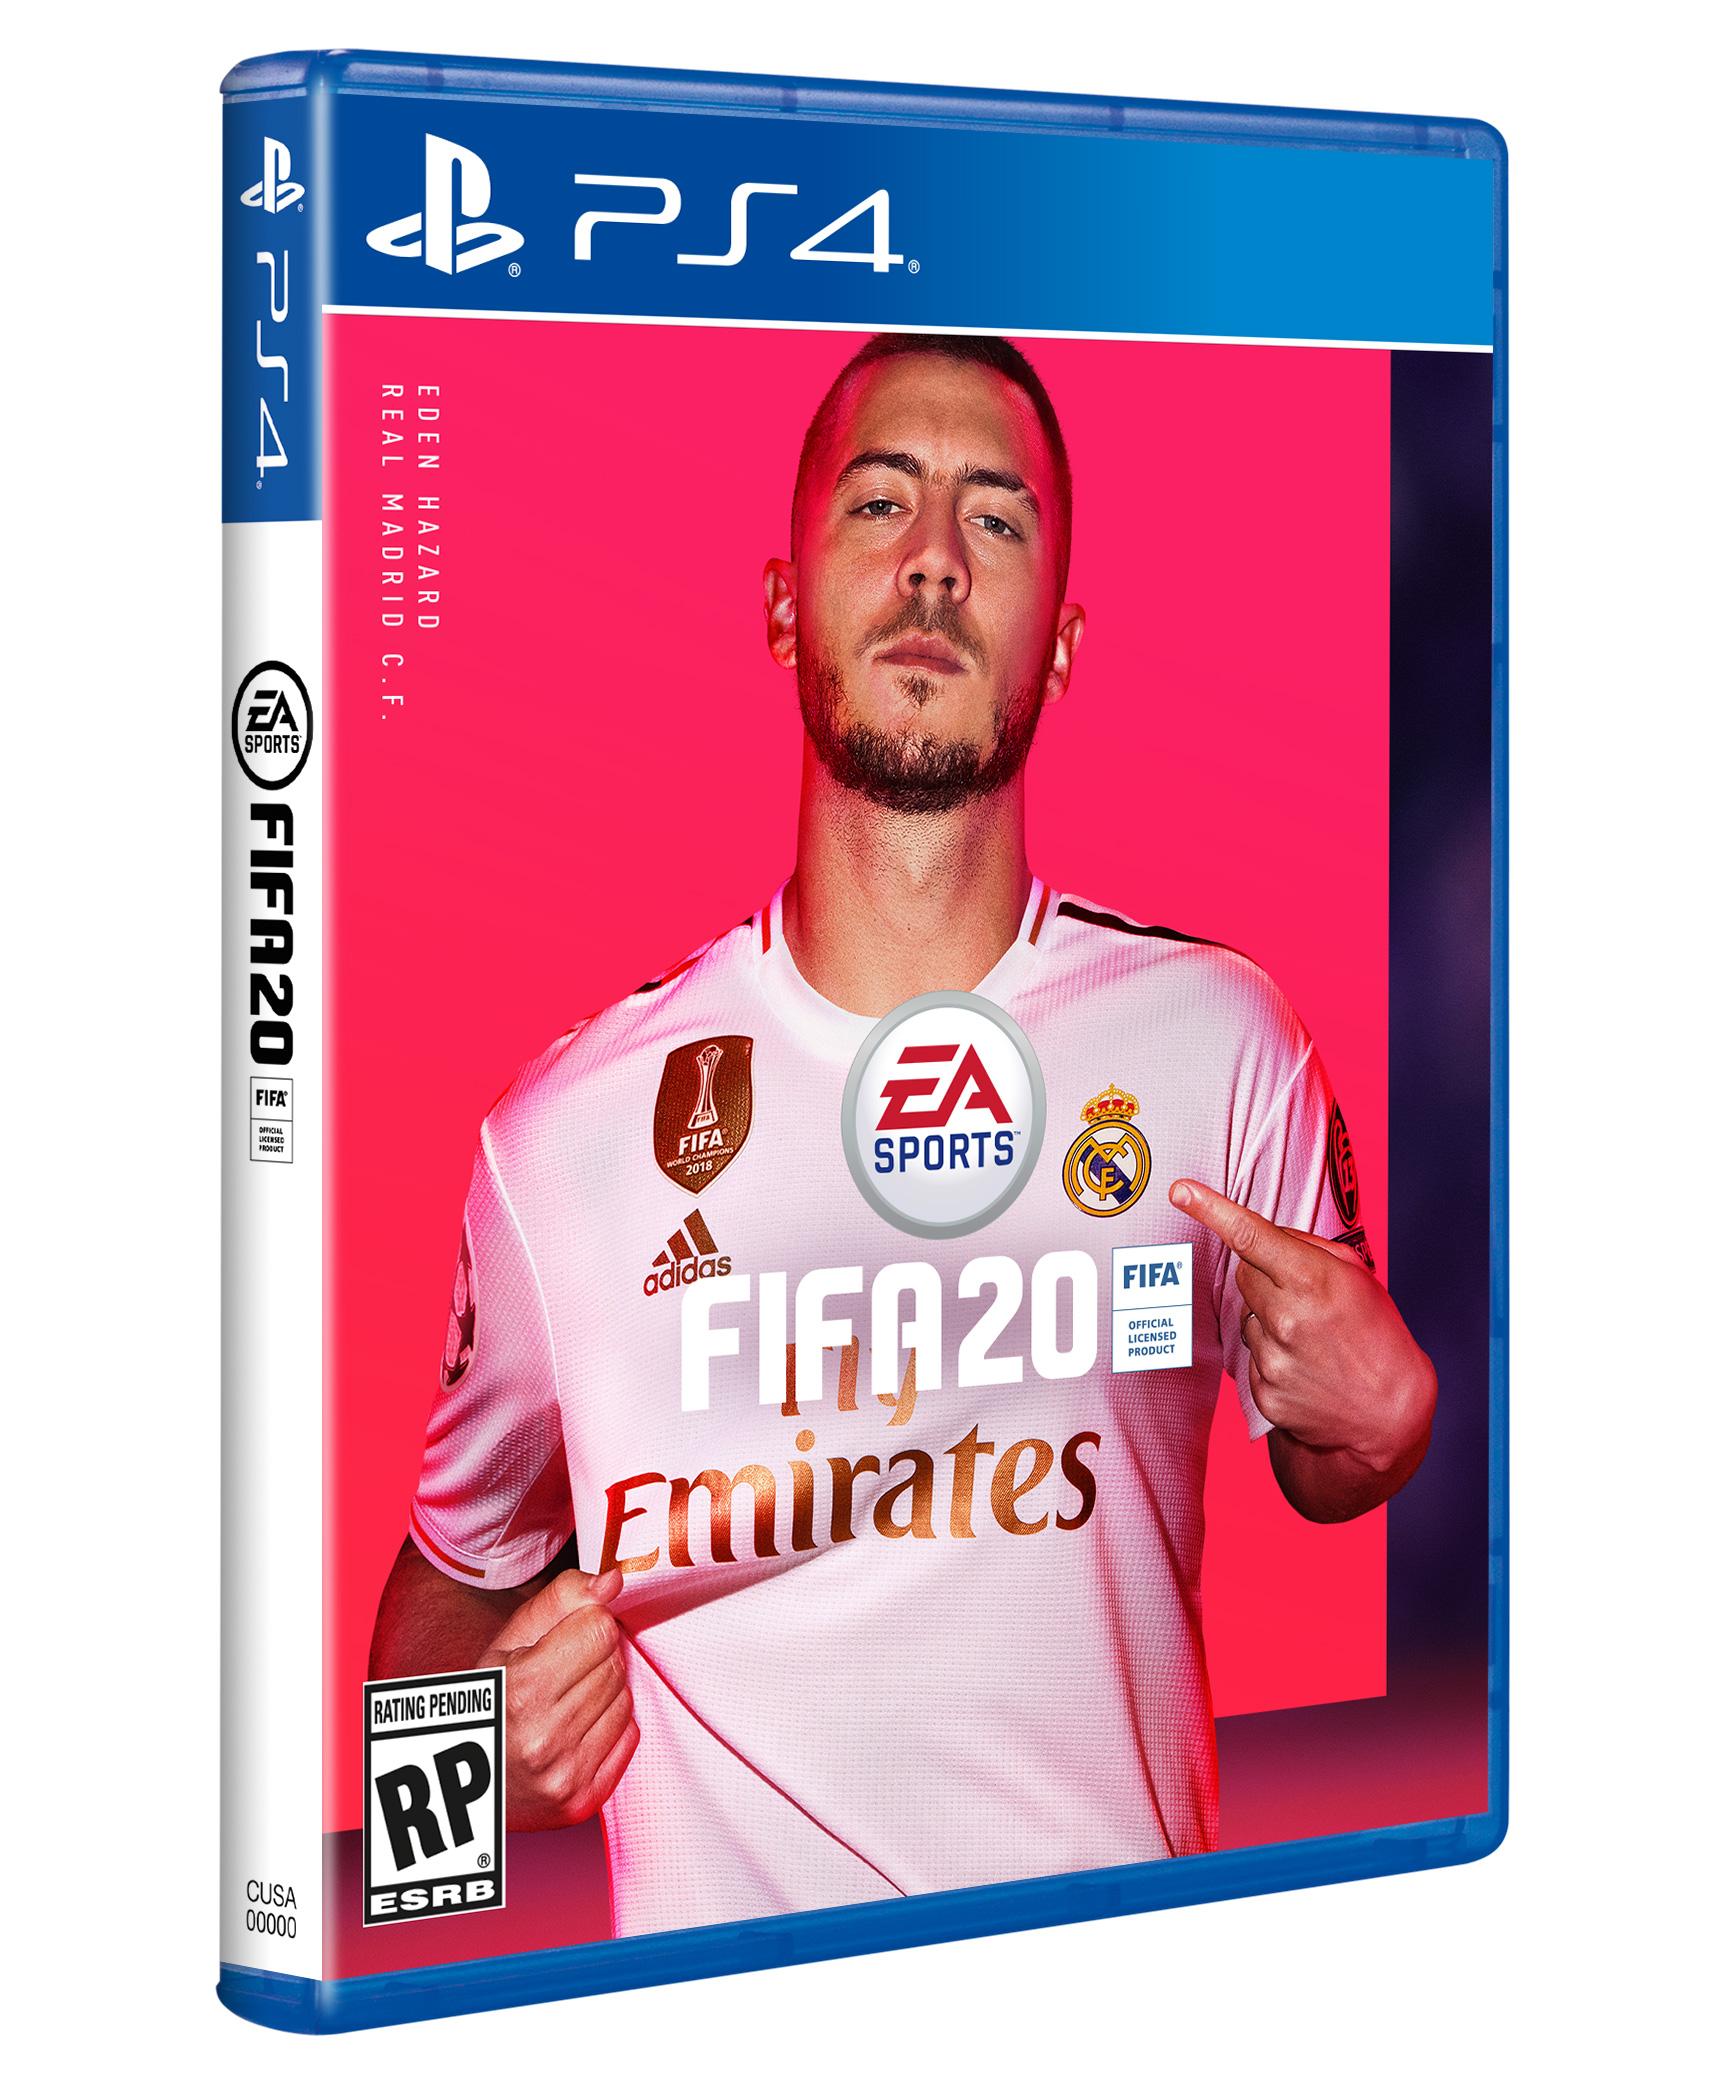 SPORTbible Sports News, Videos, Rumours and Picture Hazard FIFA 20 Poster Wallpaper